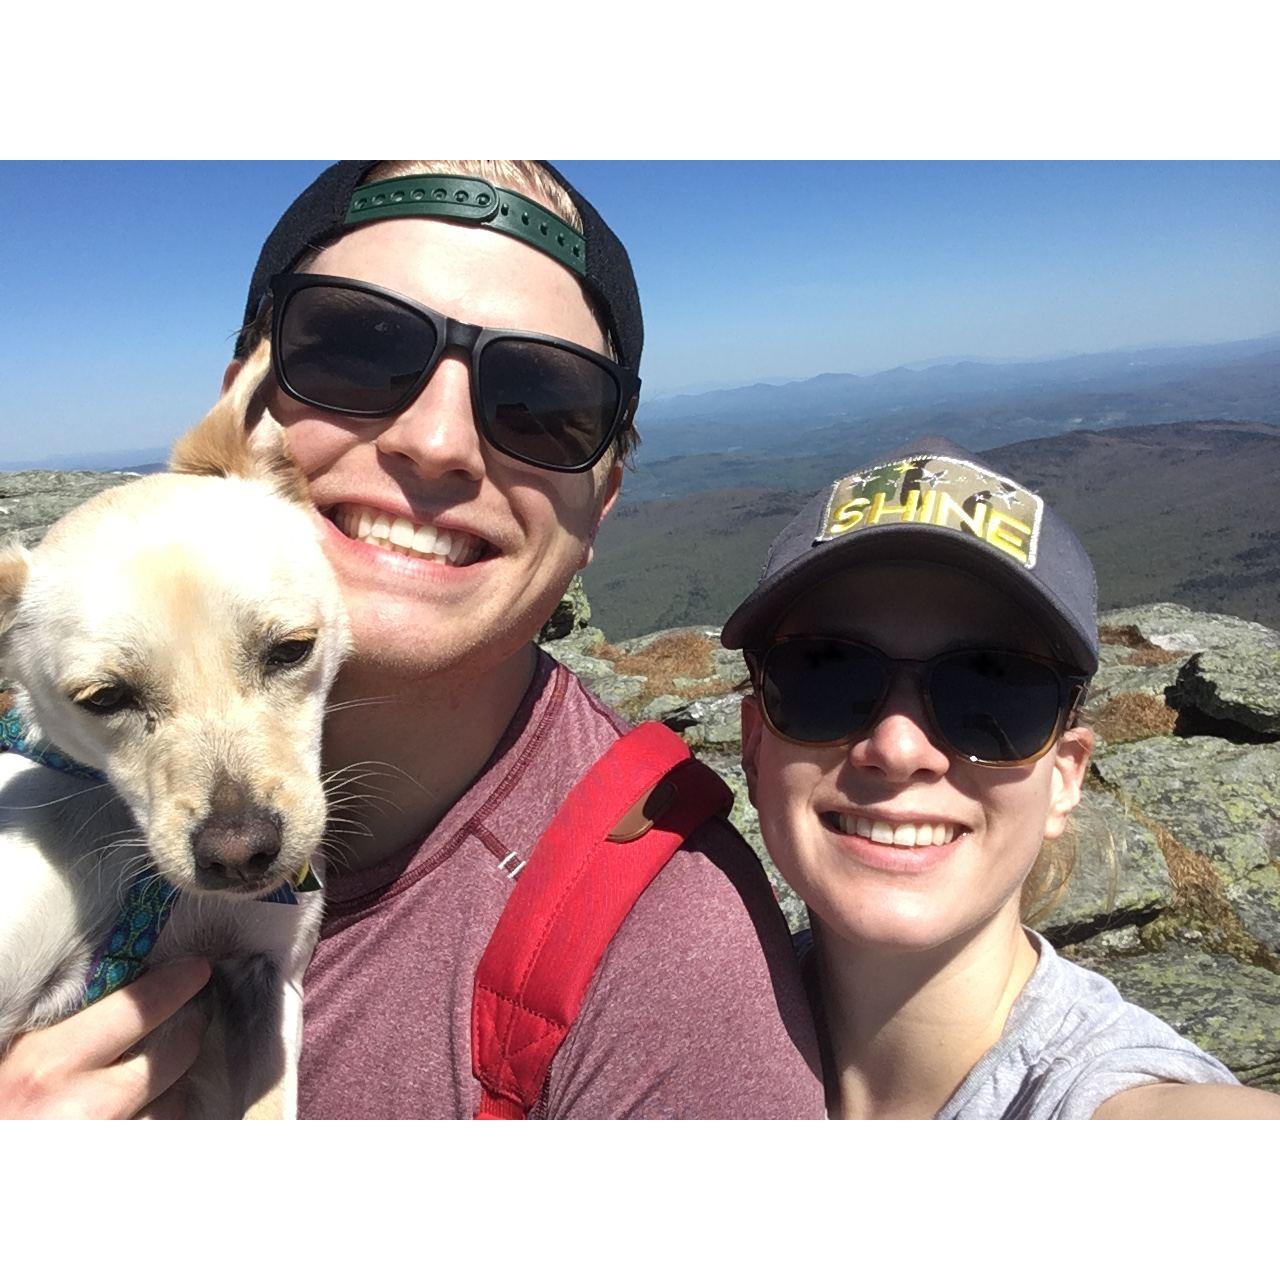 Quarantining in Vermont and hiking up Camel's Hump, 2020